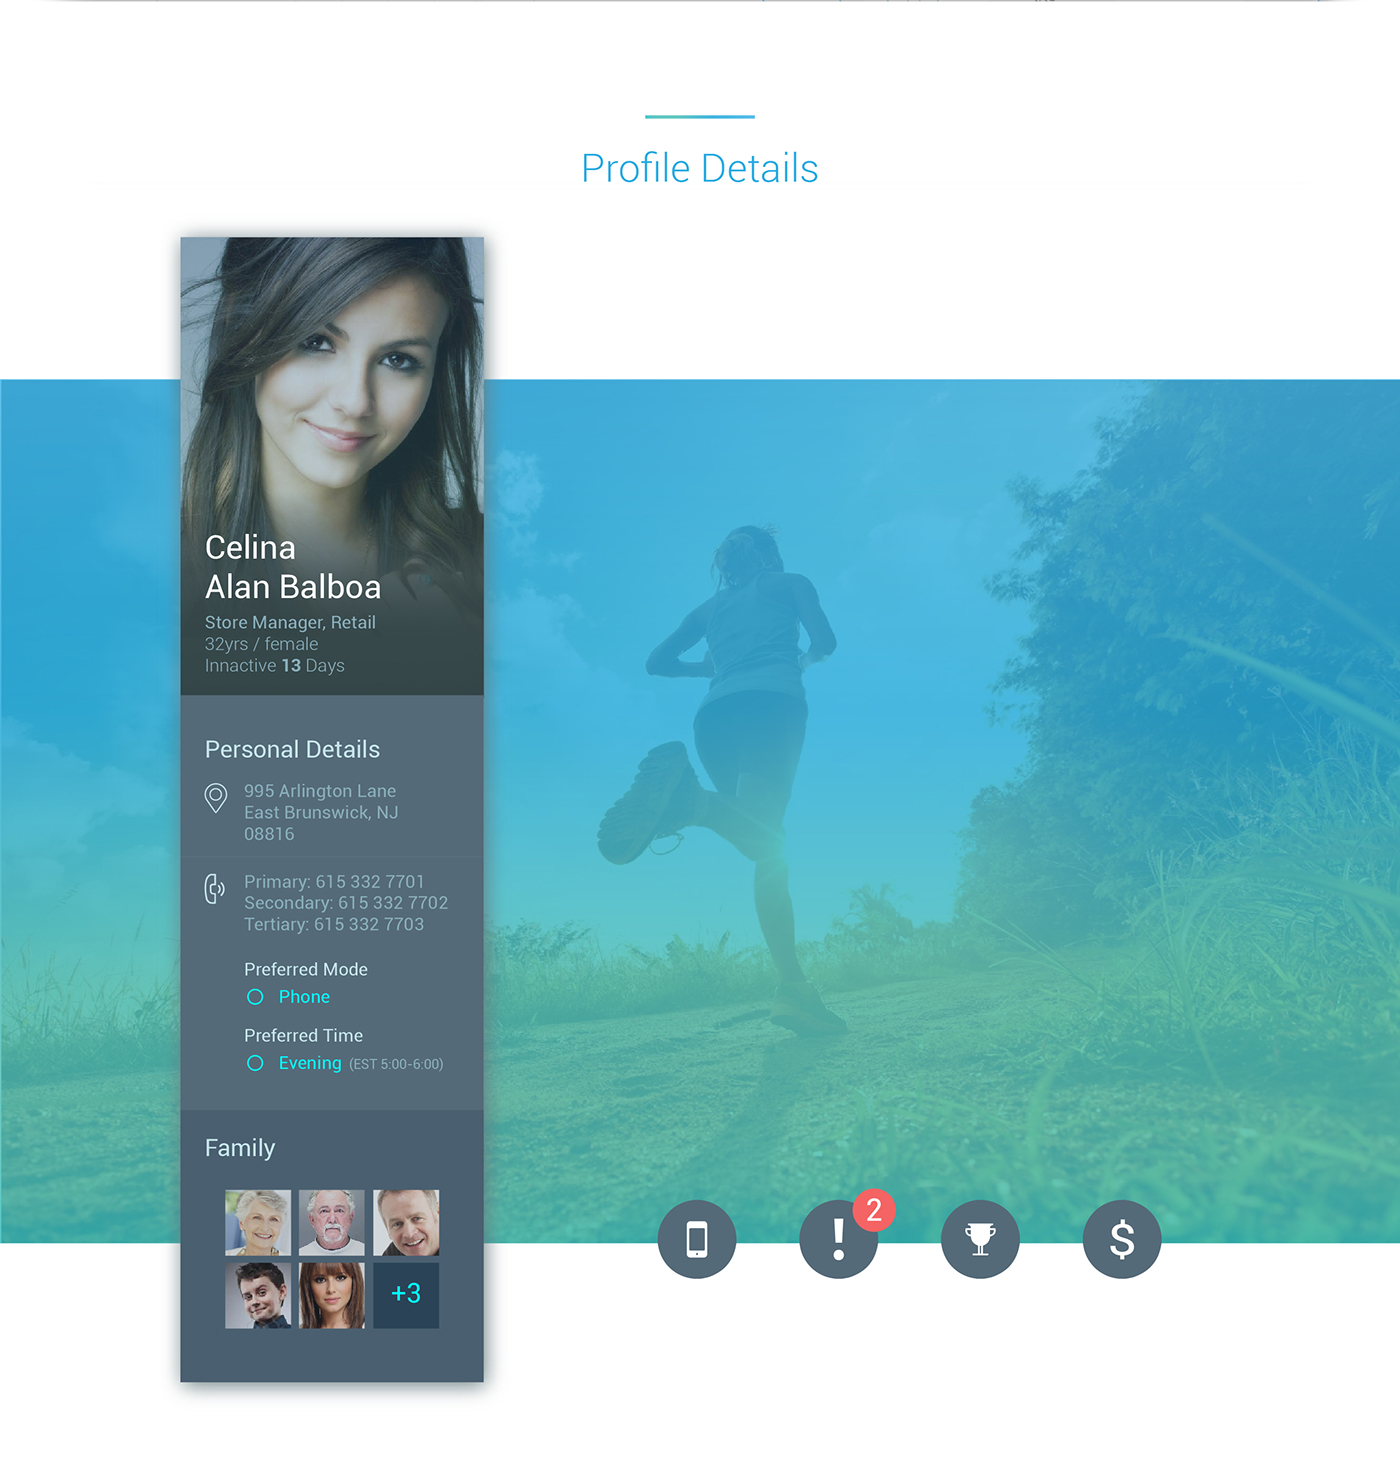 Interaction design  uiux Webdesign user interface design Wellness healthcare iconography Layout color mobile